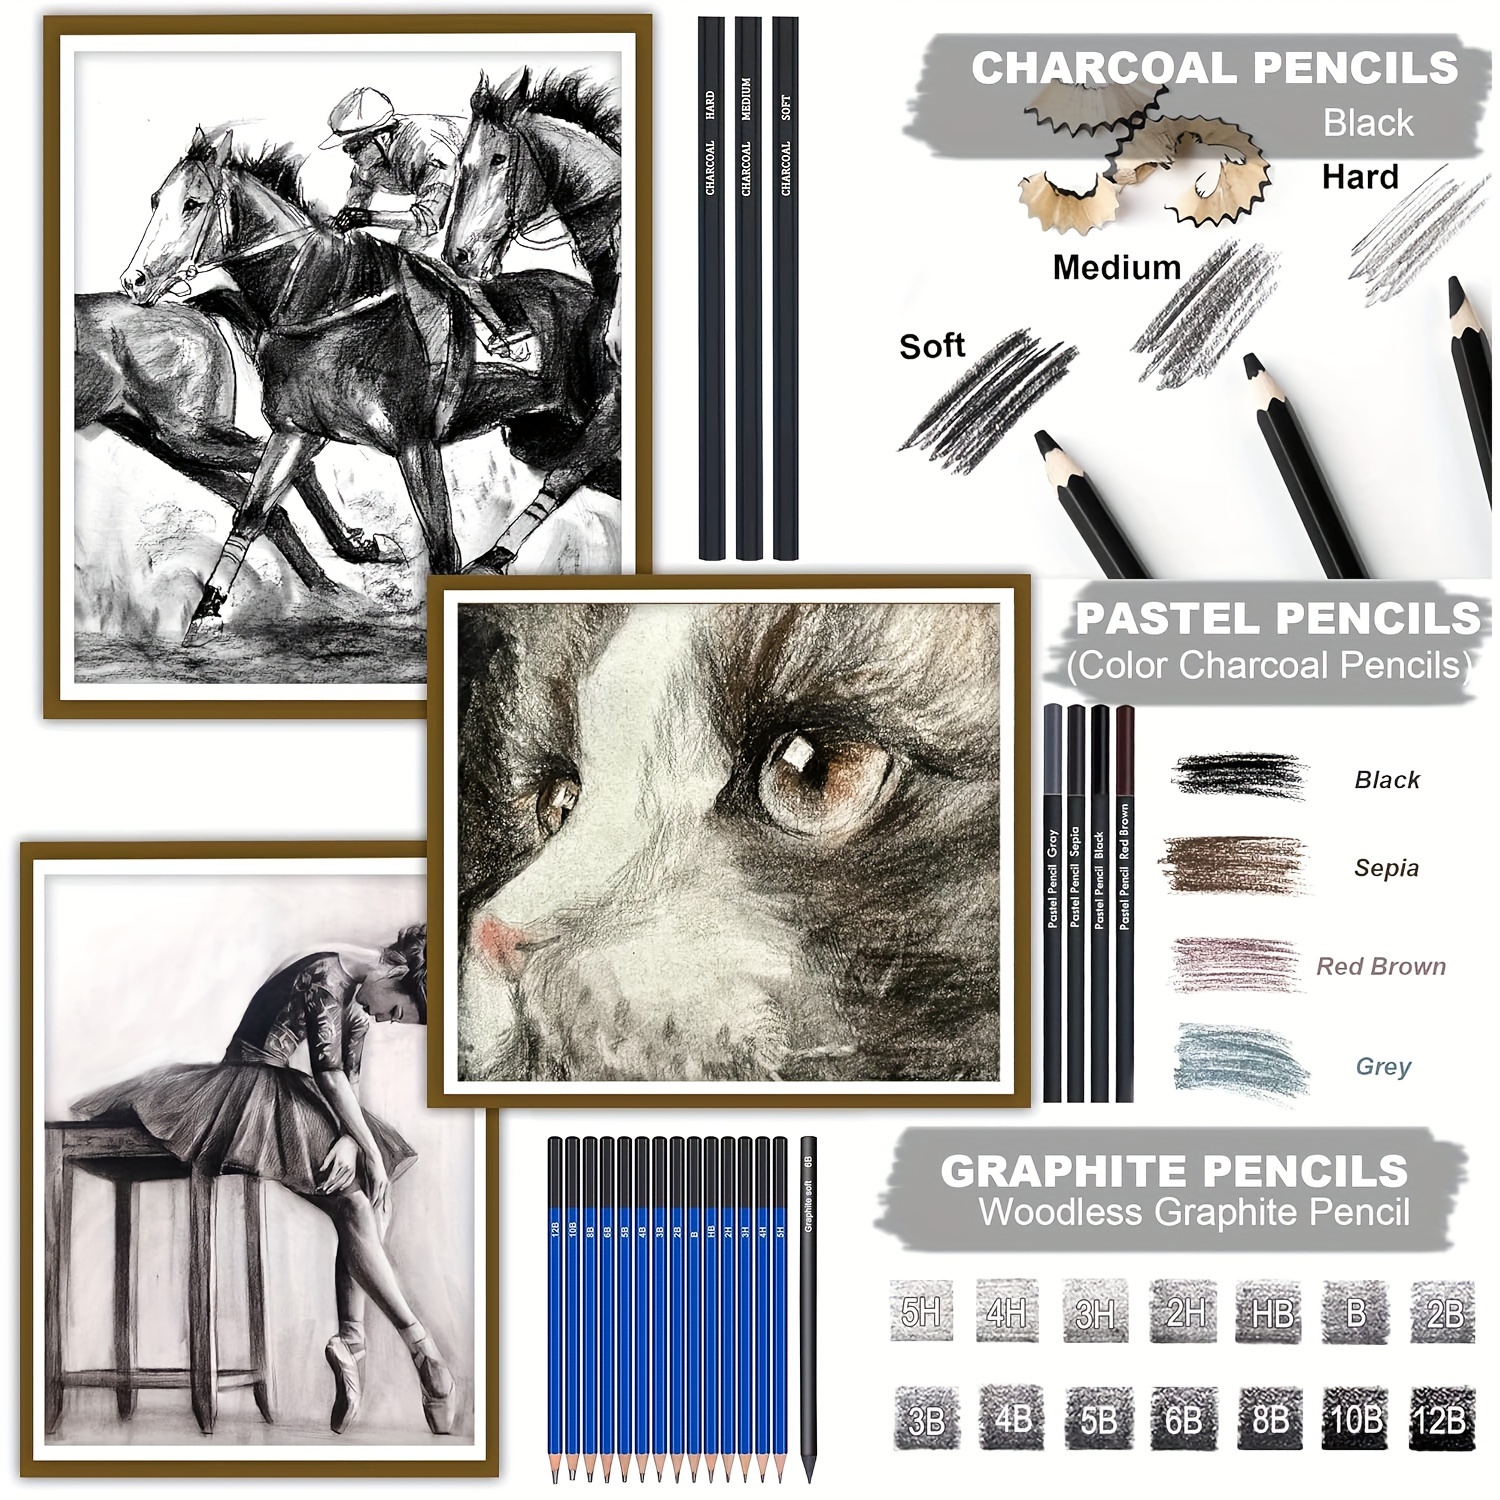 Seamiart 36pcs Professional Painting Sketch Set with Charcoal